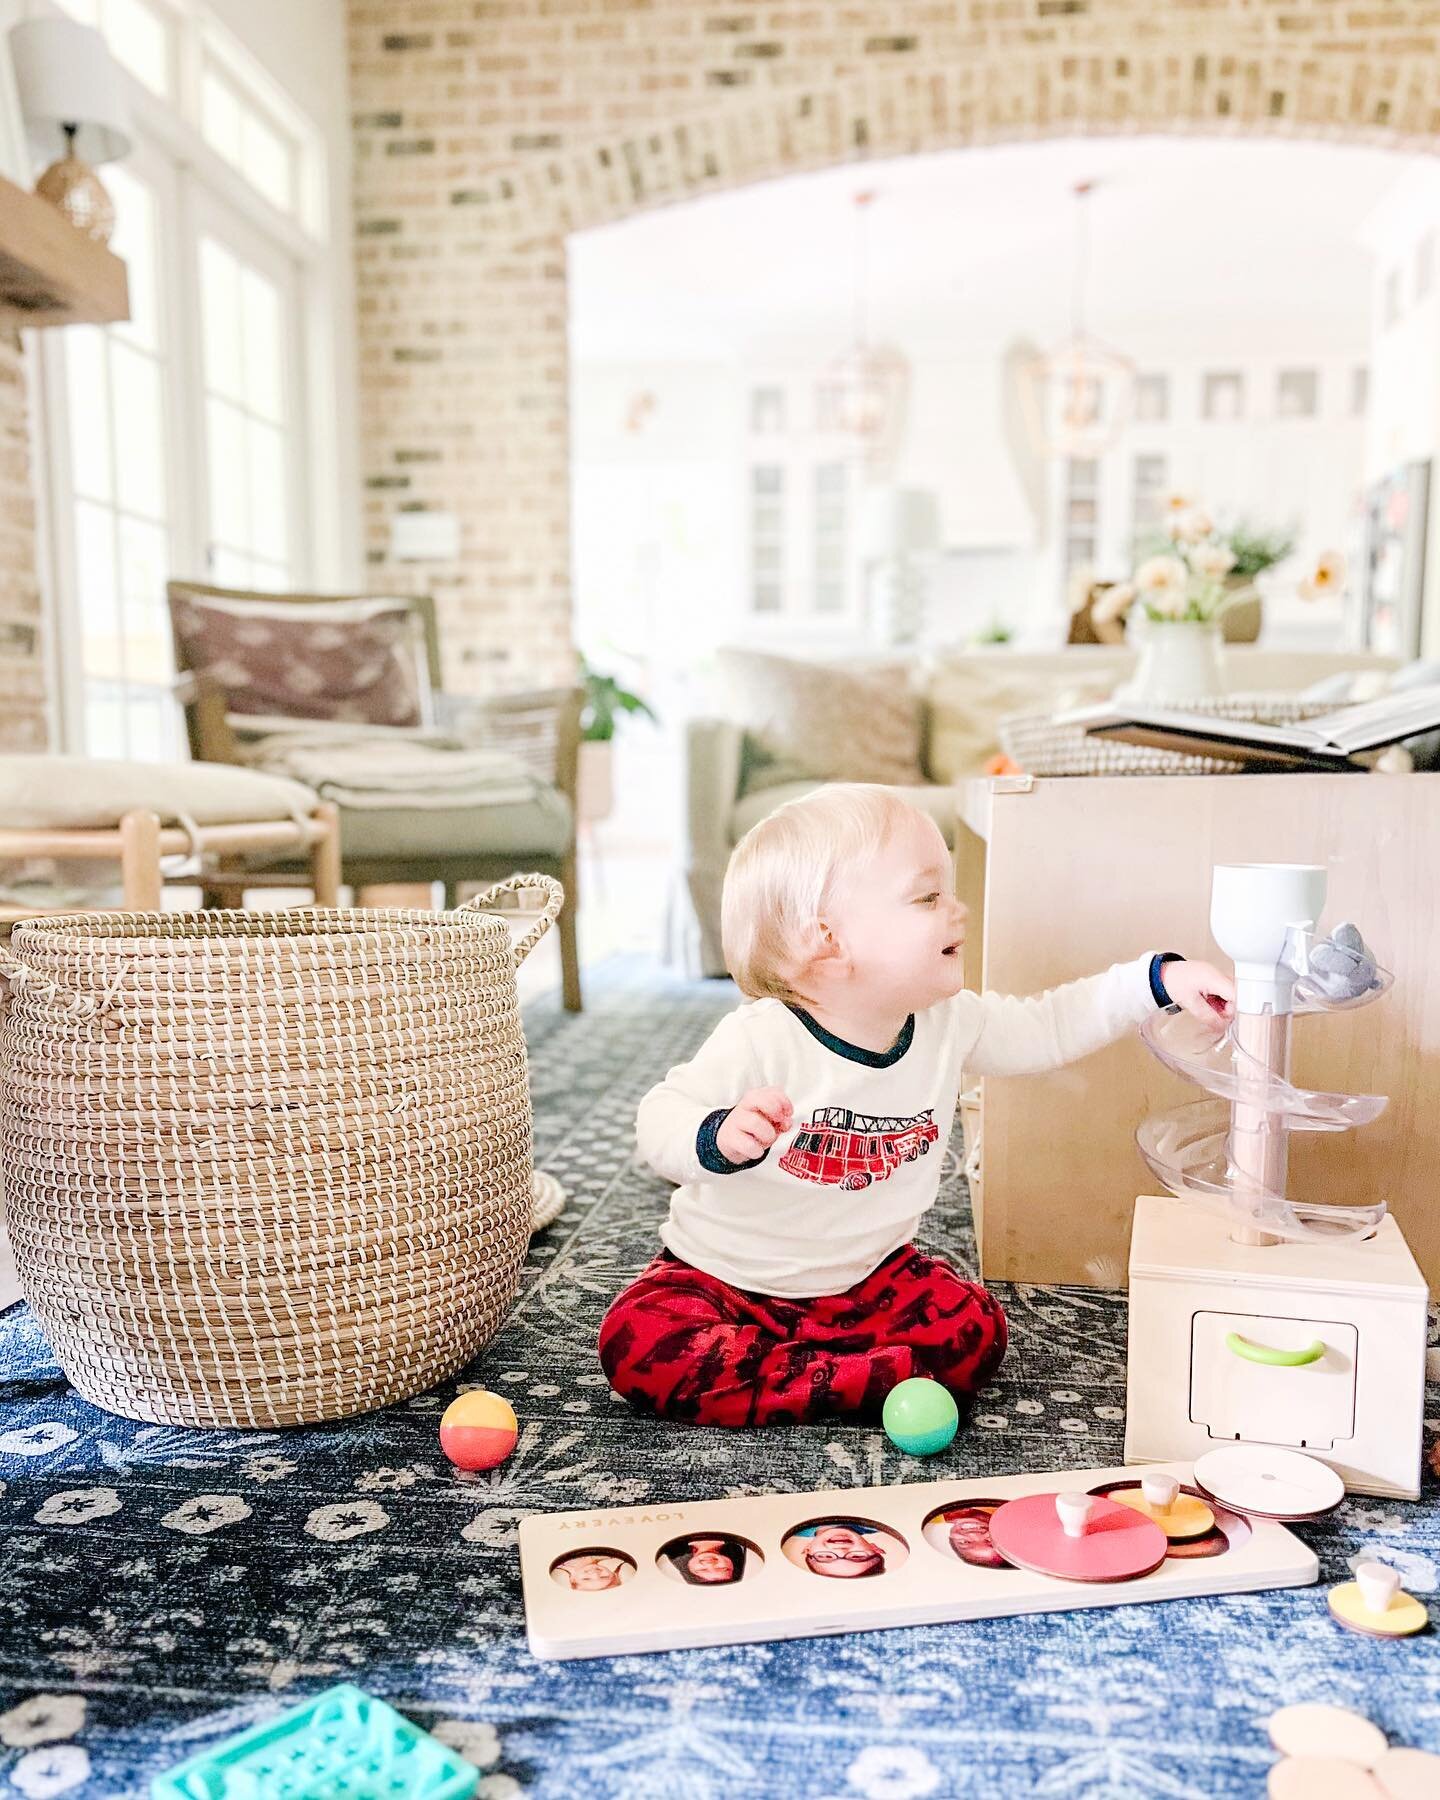 One of our favorite days is when our @lovevery Play Kit arrives! 

The kit we have this time is called the &ldquo;Babbler&rdquo; and it was specifically designed for 13-15 month olds developmental needs! 

Not only are the play kits super cute but th